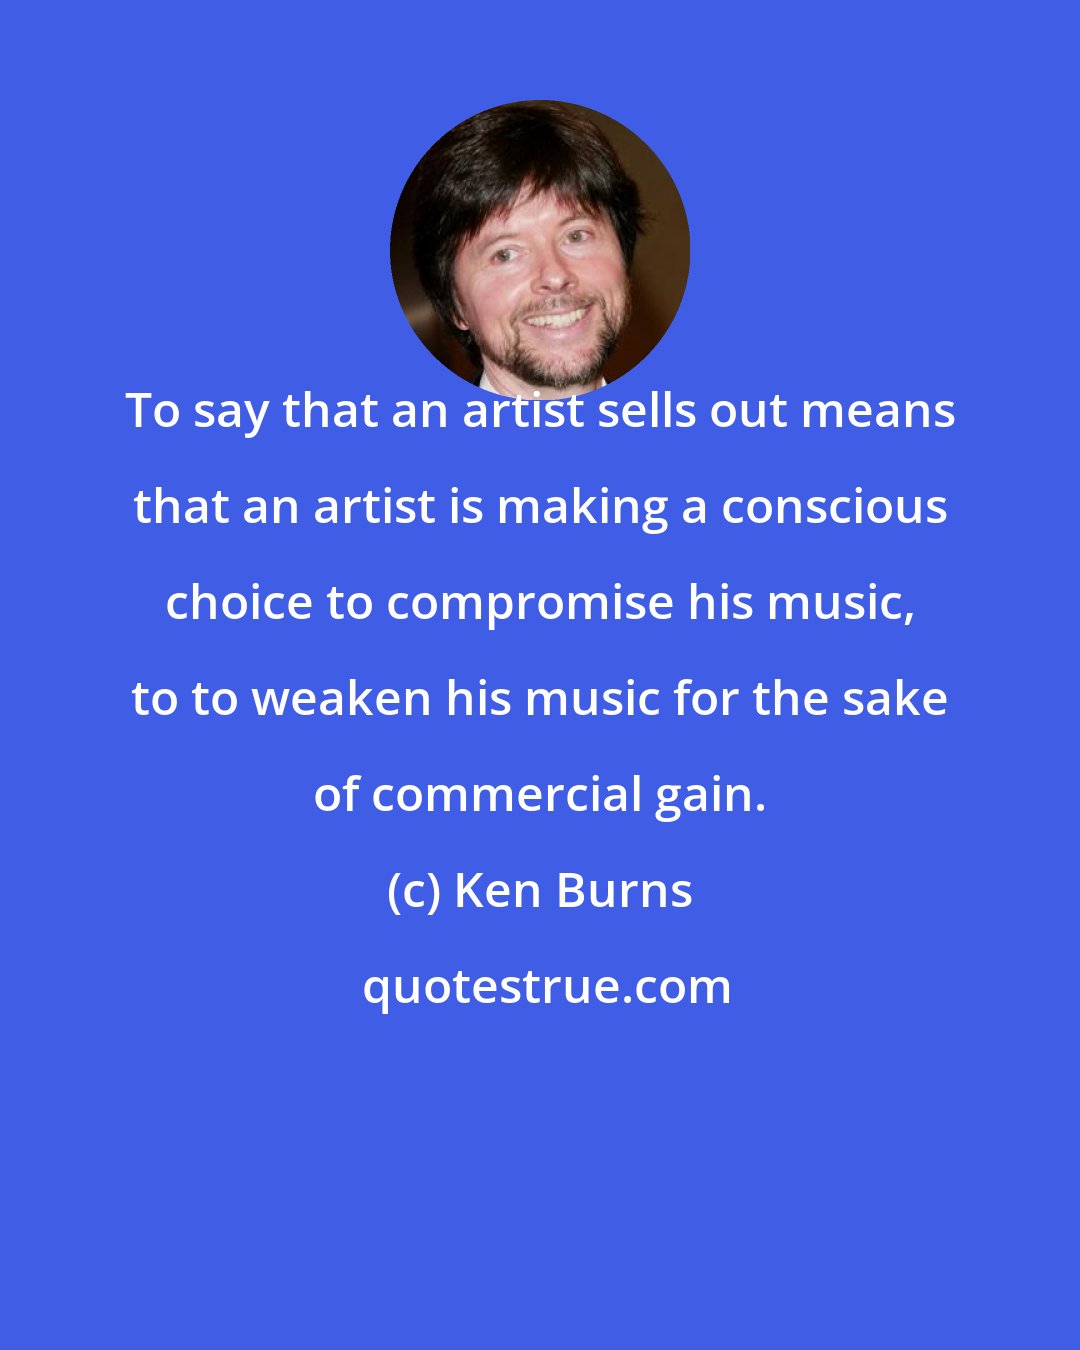 Ken Burns: To say that an artist sells out means that an artist is making a conscious choice to compromise his music, to to weaken his music for the sake of commercial gain.